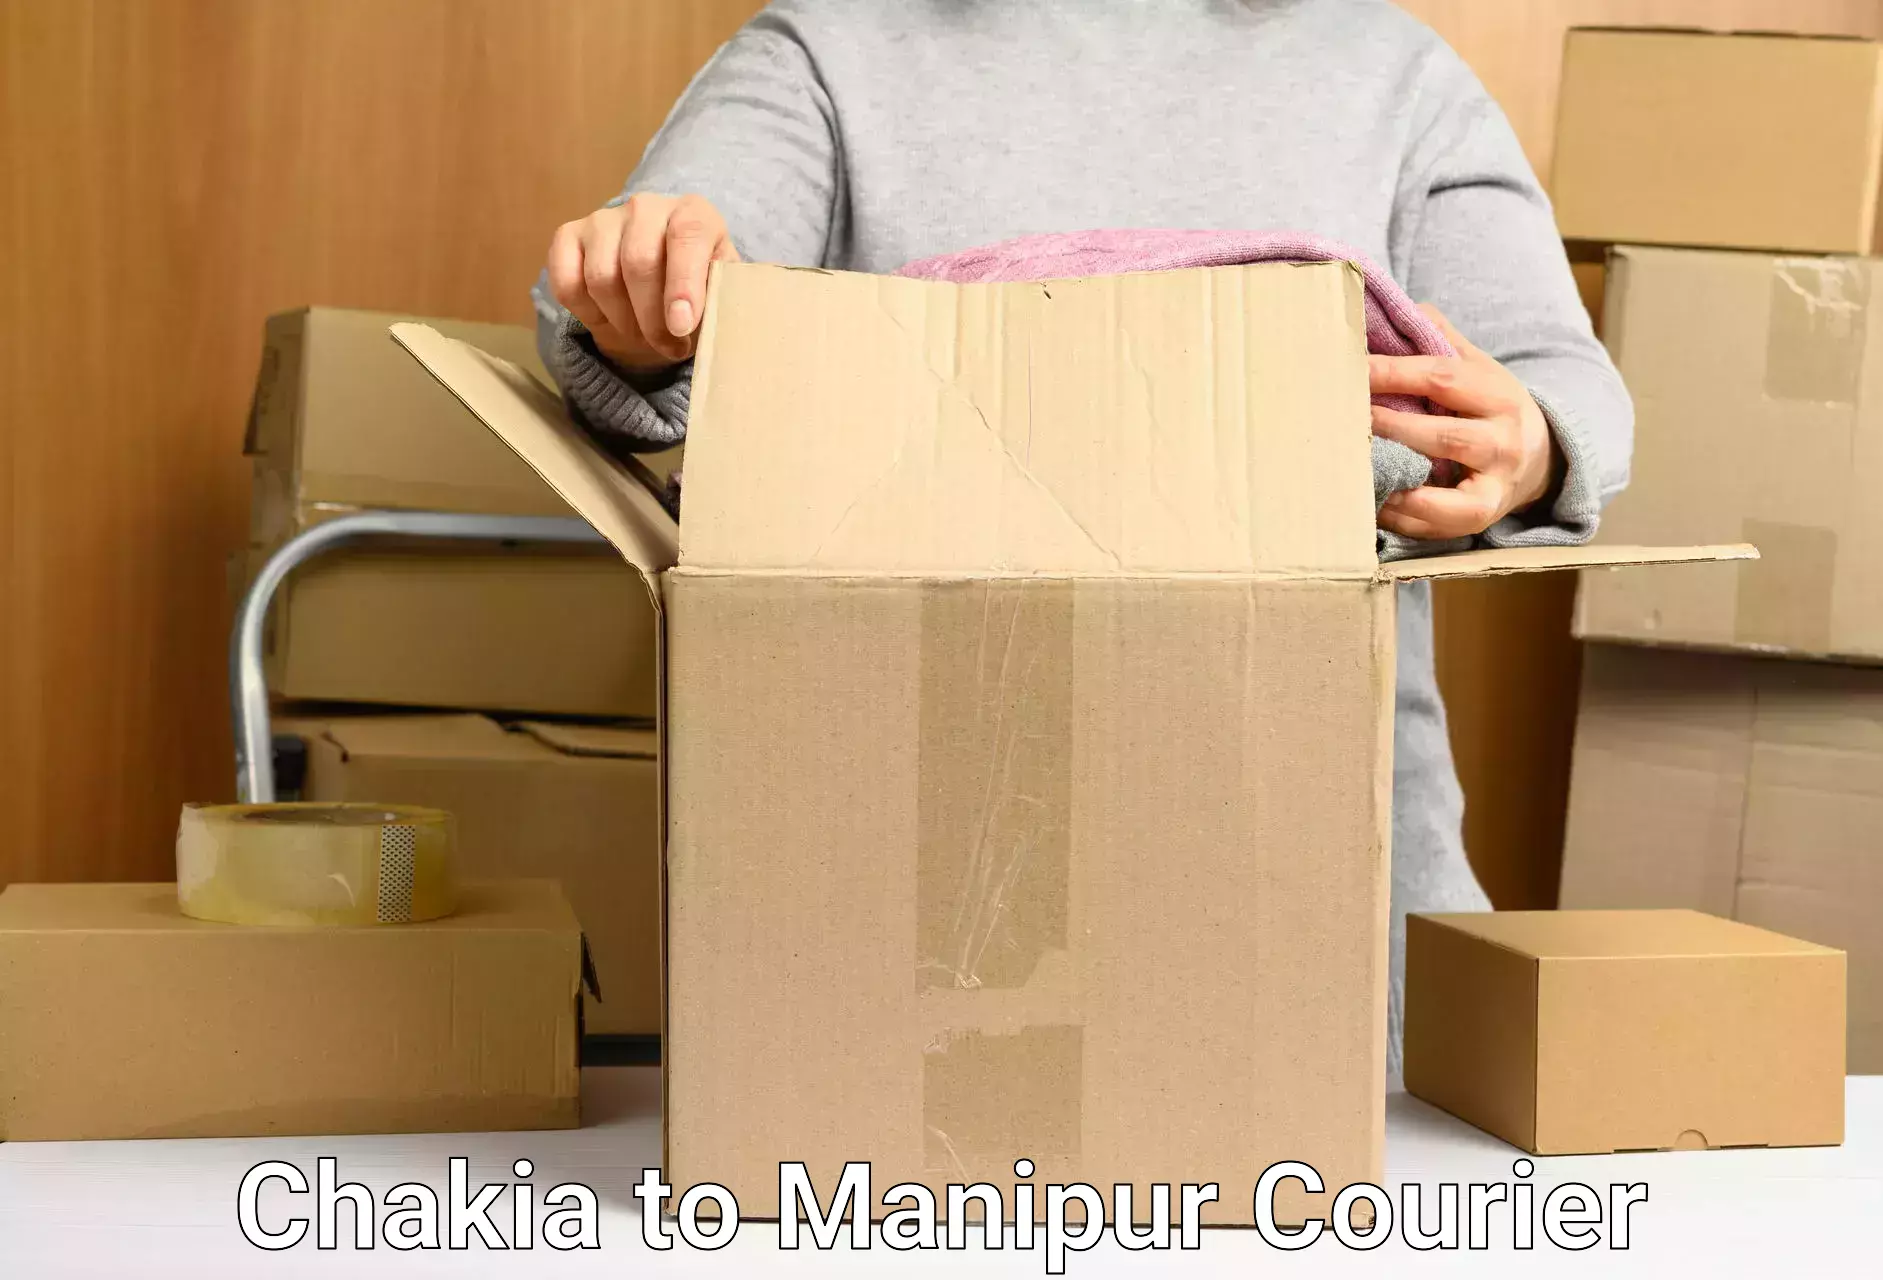 Efficient parcel tracking Chakia to Chandel